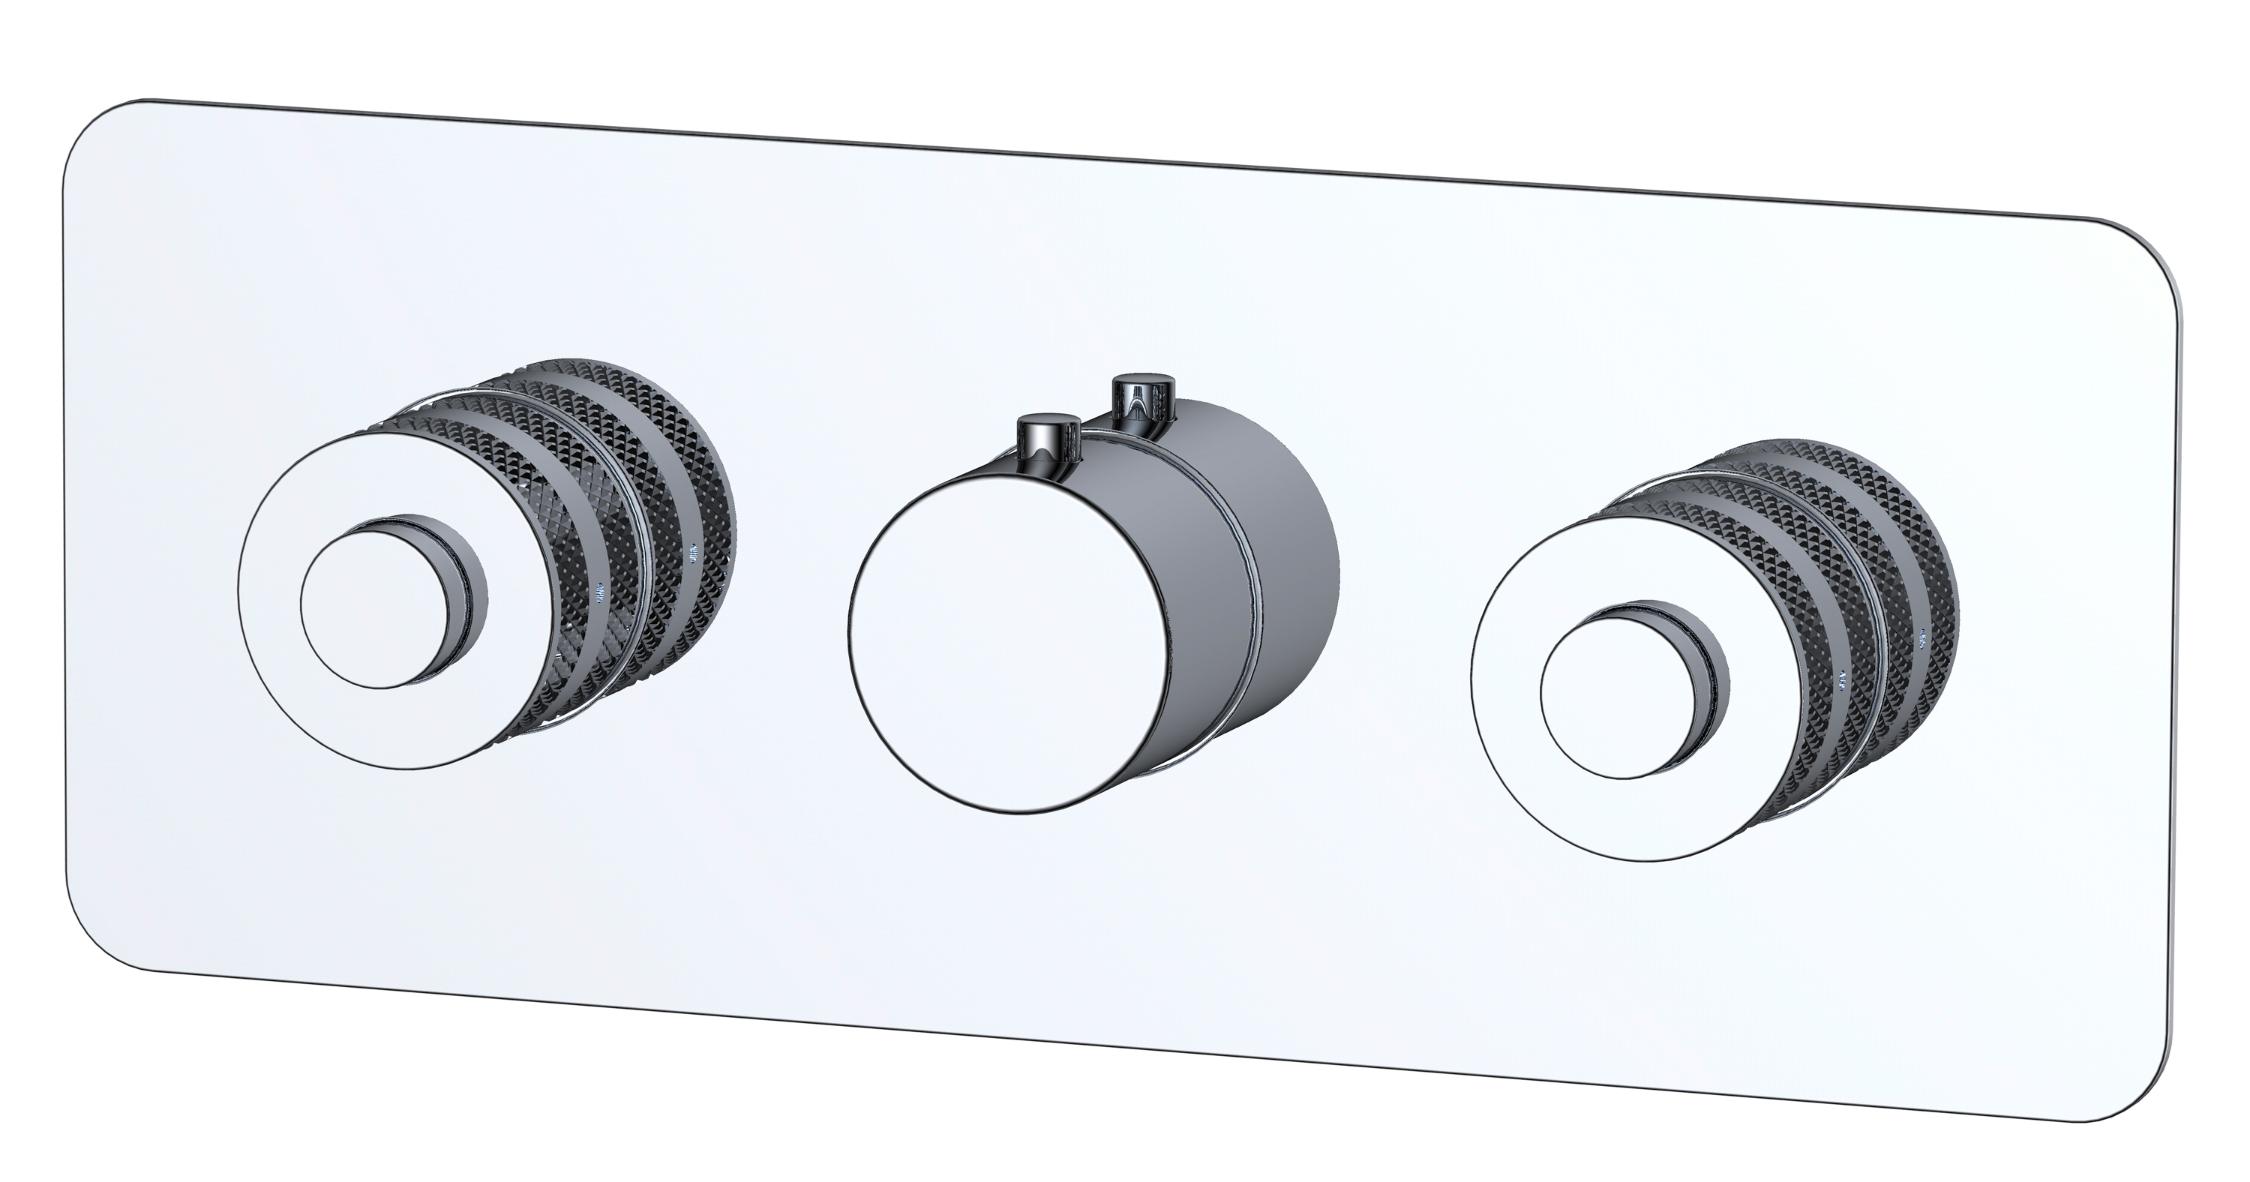 RAK Ceramics Prima Tech Dual Outlet Concealed Thermostatic Shower Valve with Back Plate (Horizontal) RAKPRT3022